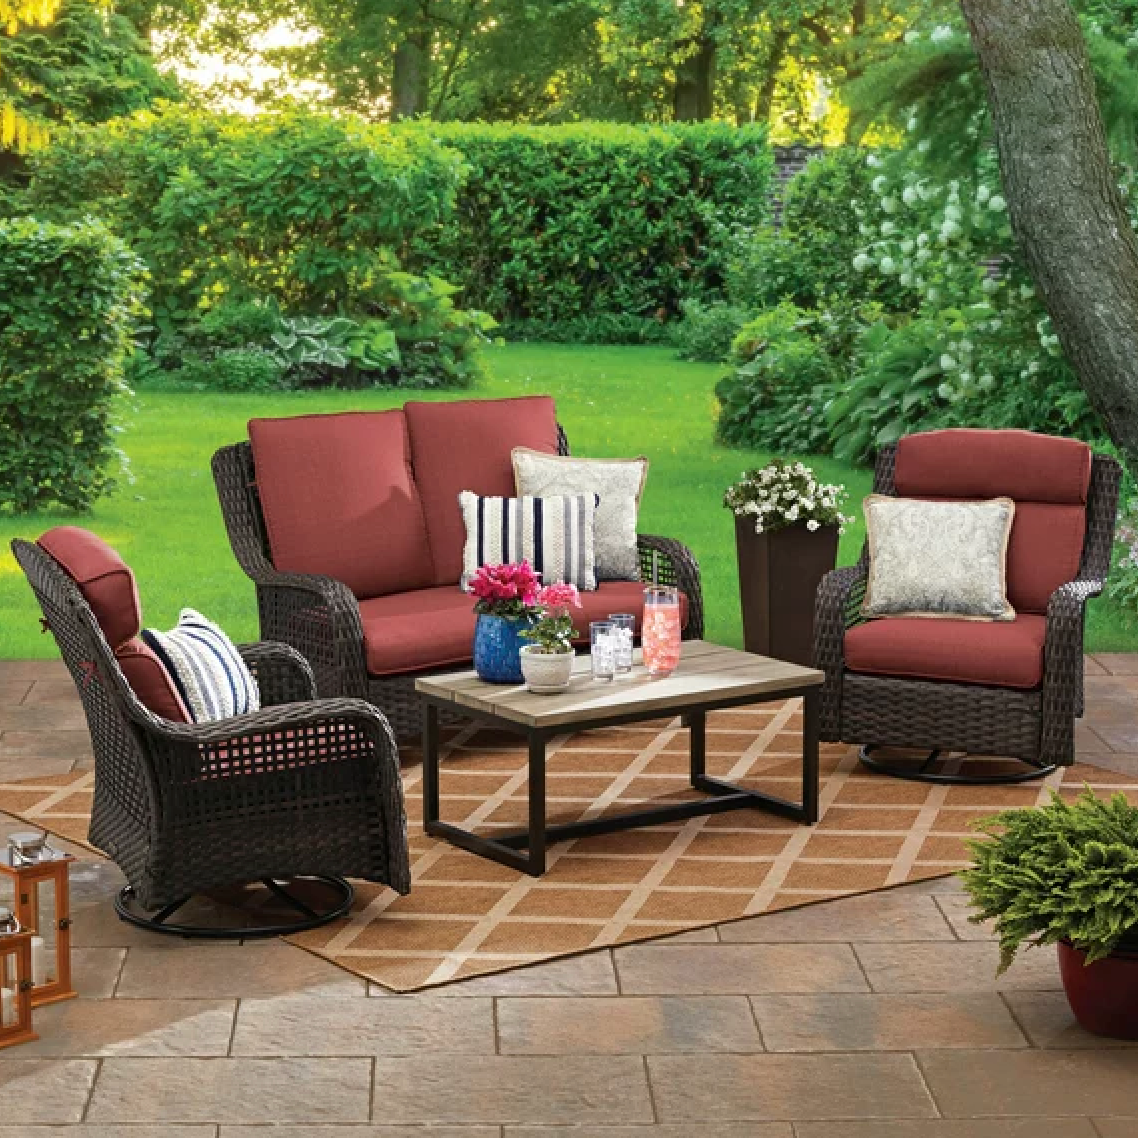 Wayfair's Massive Outdoor Furniture Clearance Sale Can Save You Up to 60%  Off Sofas, Adirondack Chairs & More